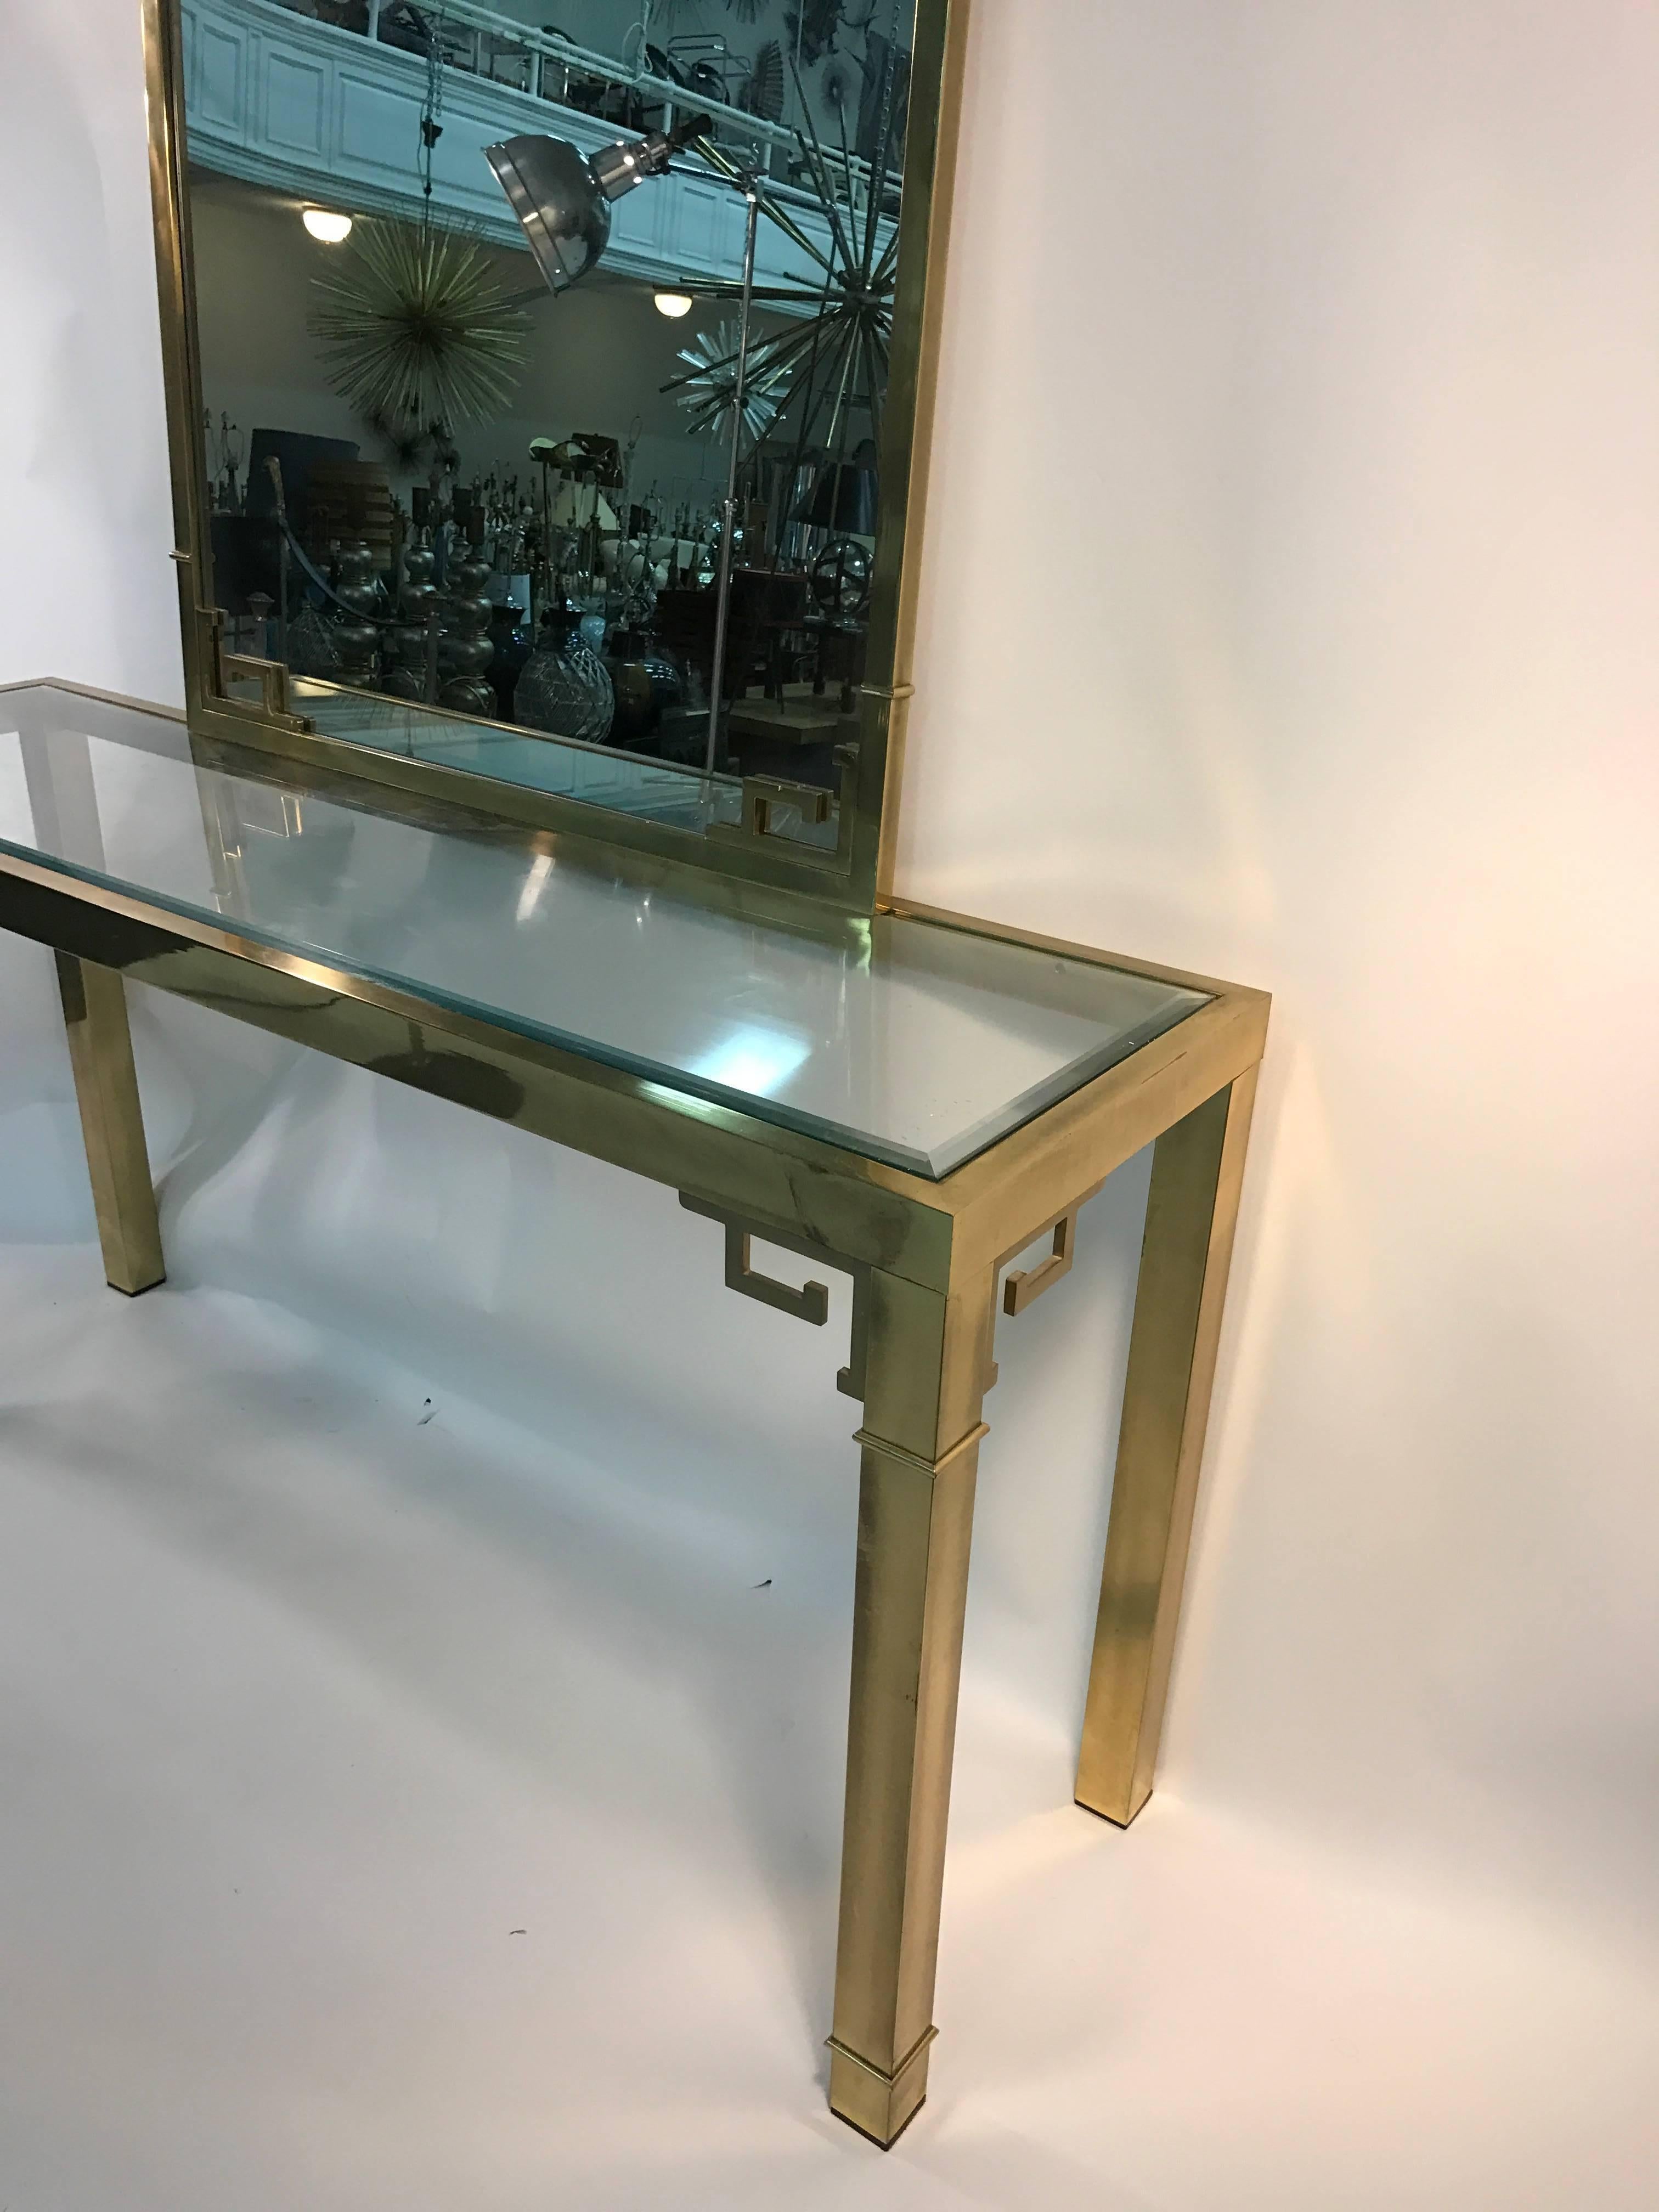 Stunning Solid Brass Italian Mirror and Console Table with Greek Key Design In Good Condition For Sale In Mount Penn, PA